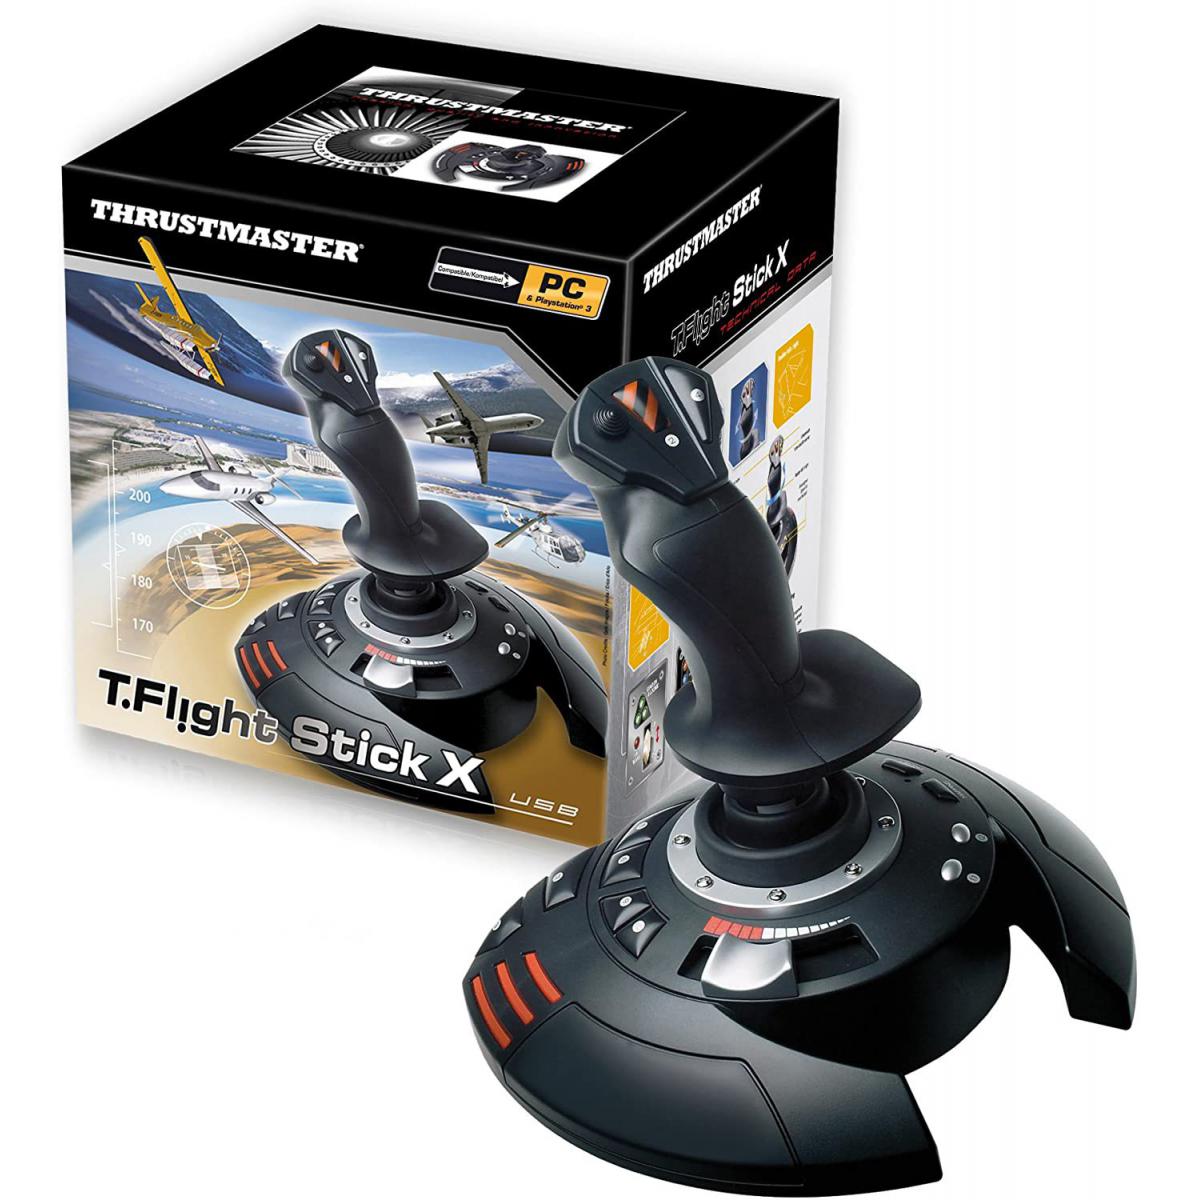 Thrustmaster Thrustmaster - T.Flight Stick X PS3 - Manette Flight Simulator pour PS3 - 12 Boutons